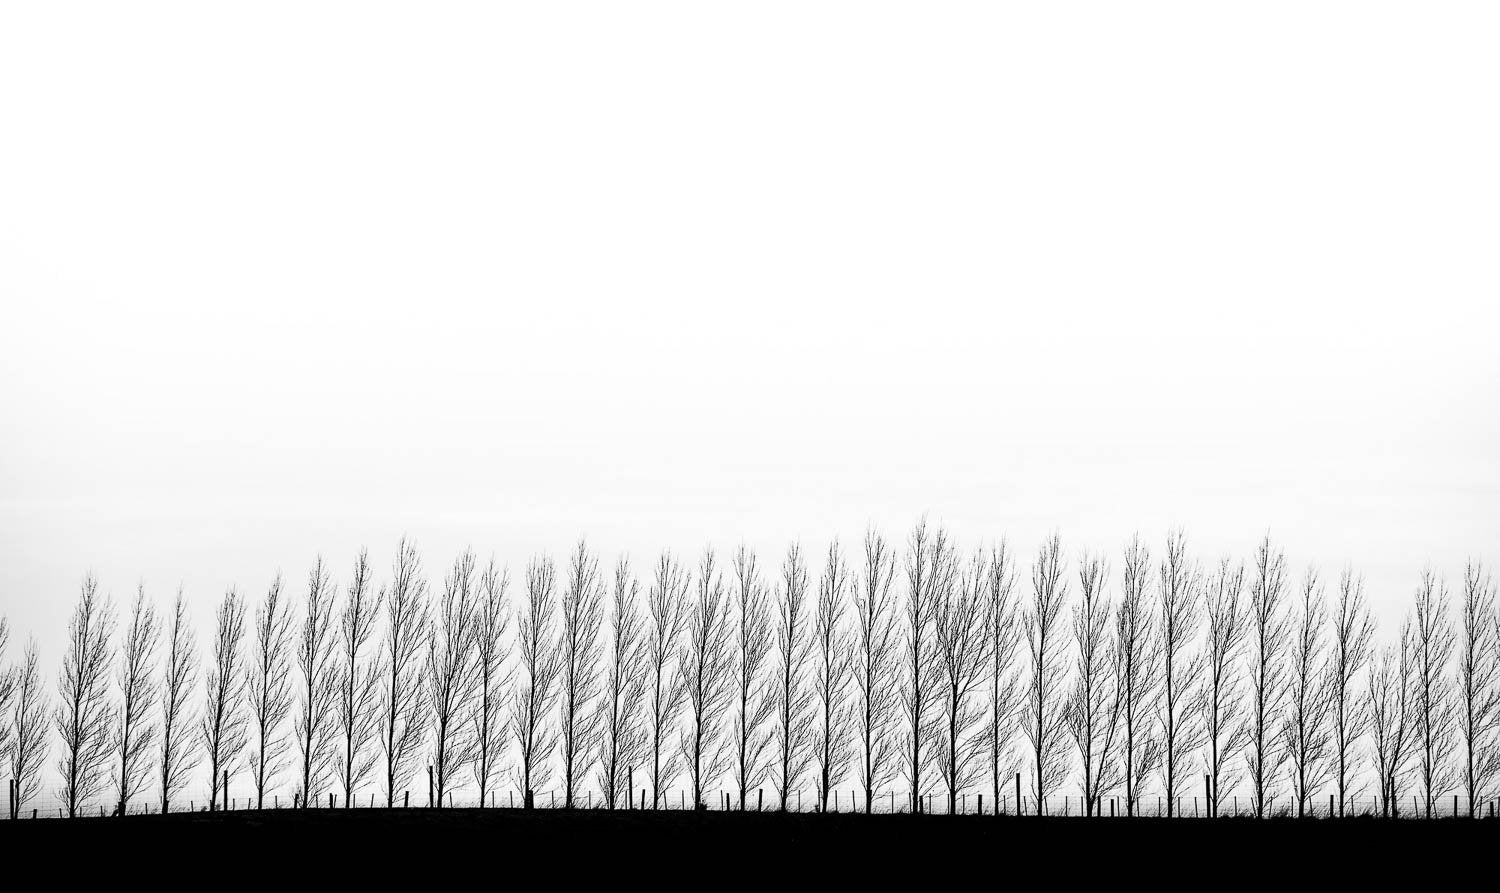 A long shot of a lengthy row of tall standing trees in a snow-covered land, New Zealand #30